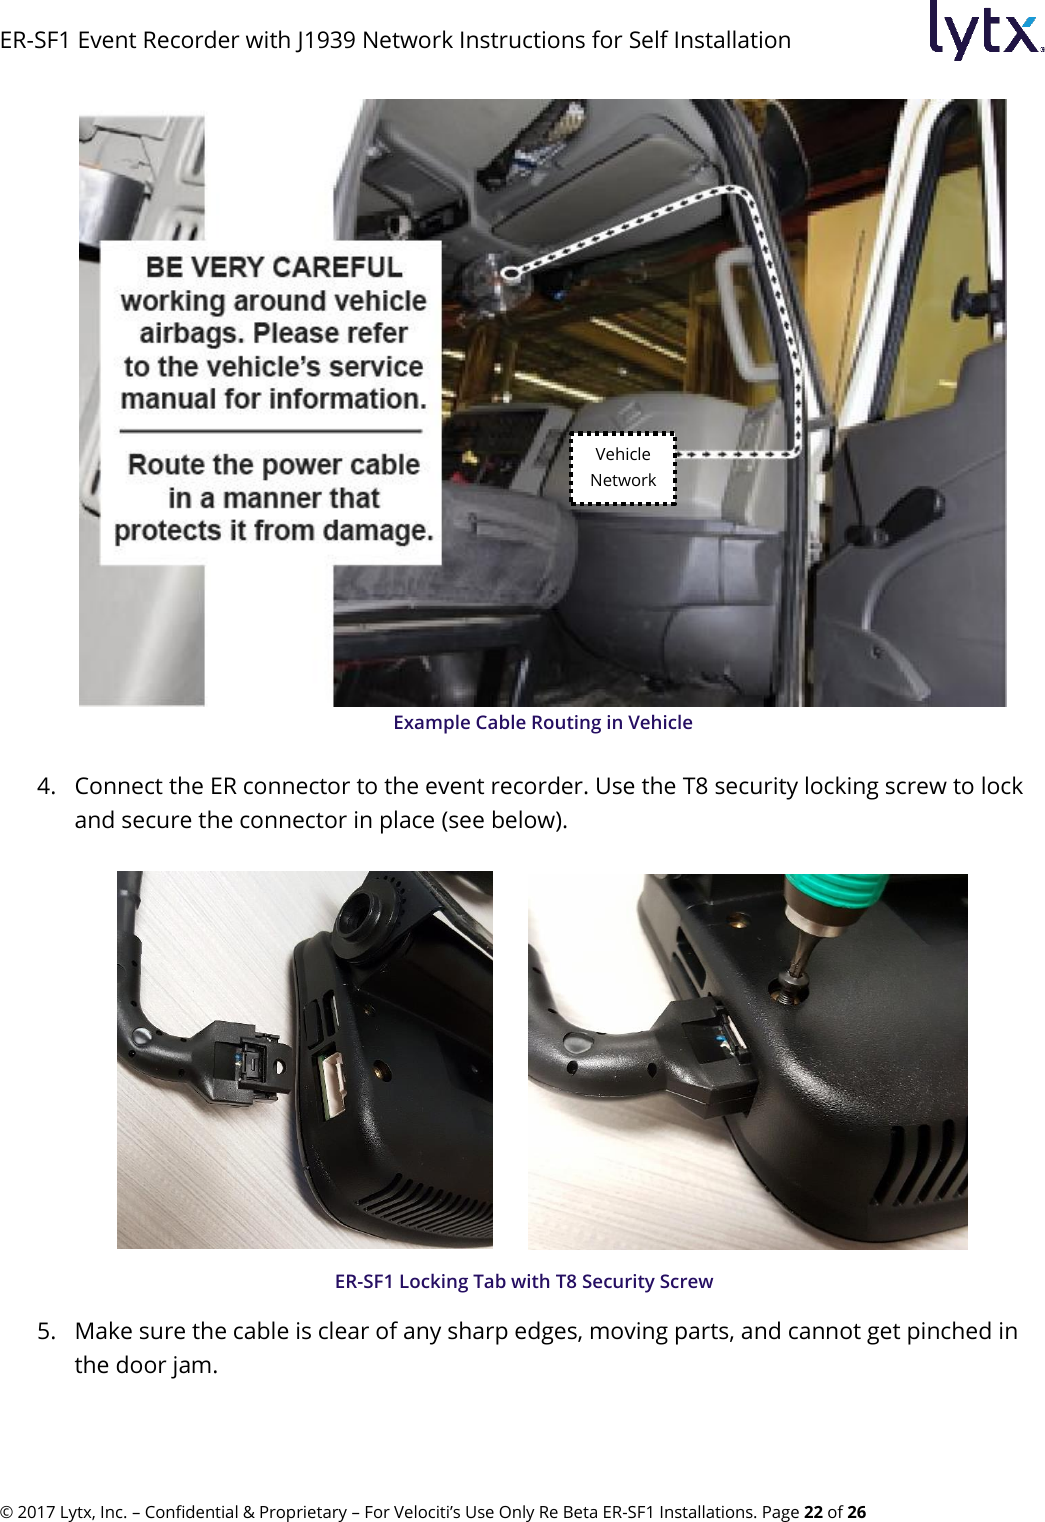 ER-SF1 Event Recorder with J1939 Network Instructions for Self Installation © 2017 Lytx, Inc. – Confidential &amp; Proprietary – For Velociti’s Use Only Re Beta ER-SF1 Installations. Page 22 of 26  Example Cable Routing in Vehicle  4. Connect the ER connector to the event recorder. Use the T8 security locking screw to lock and secure the connector in place (see below).          ER-SF1 Locking Tab with T8 Security Screw 5. Make sure the cable is clear of any sharp edges, moving parts, and cannot get pinched in the door jam. Vehicle Network 